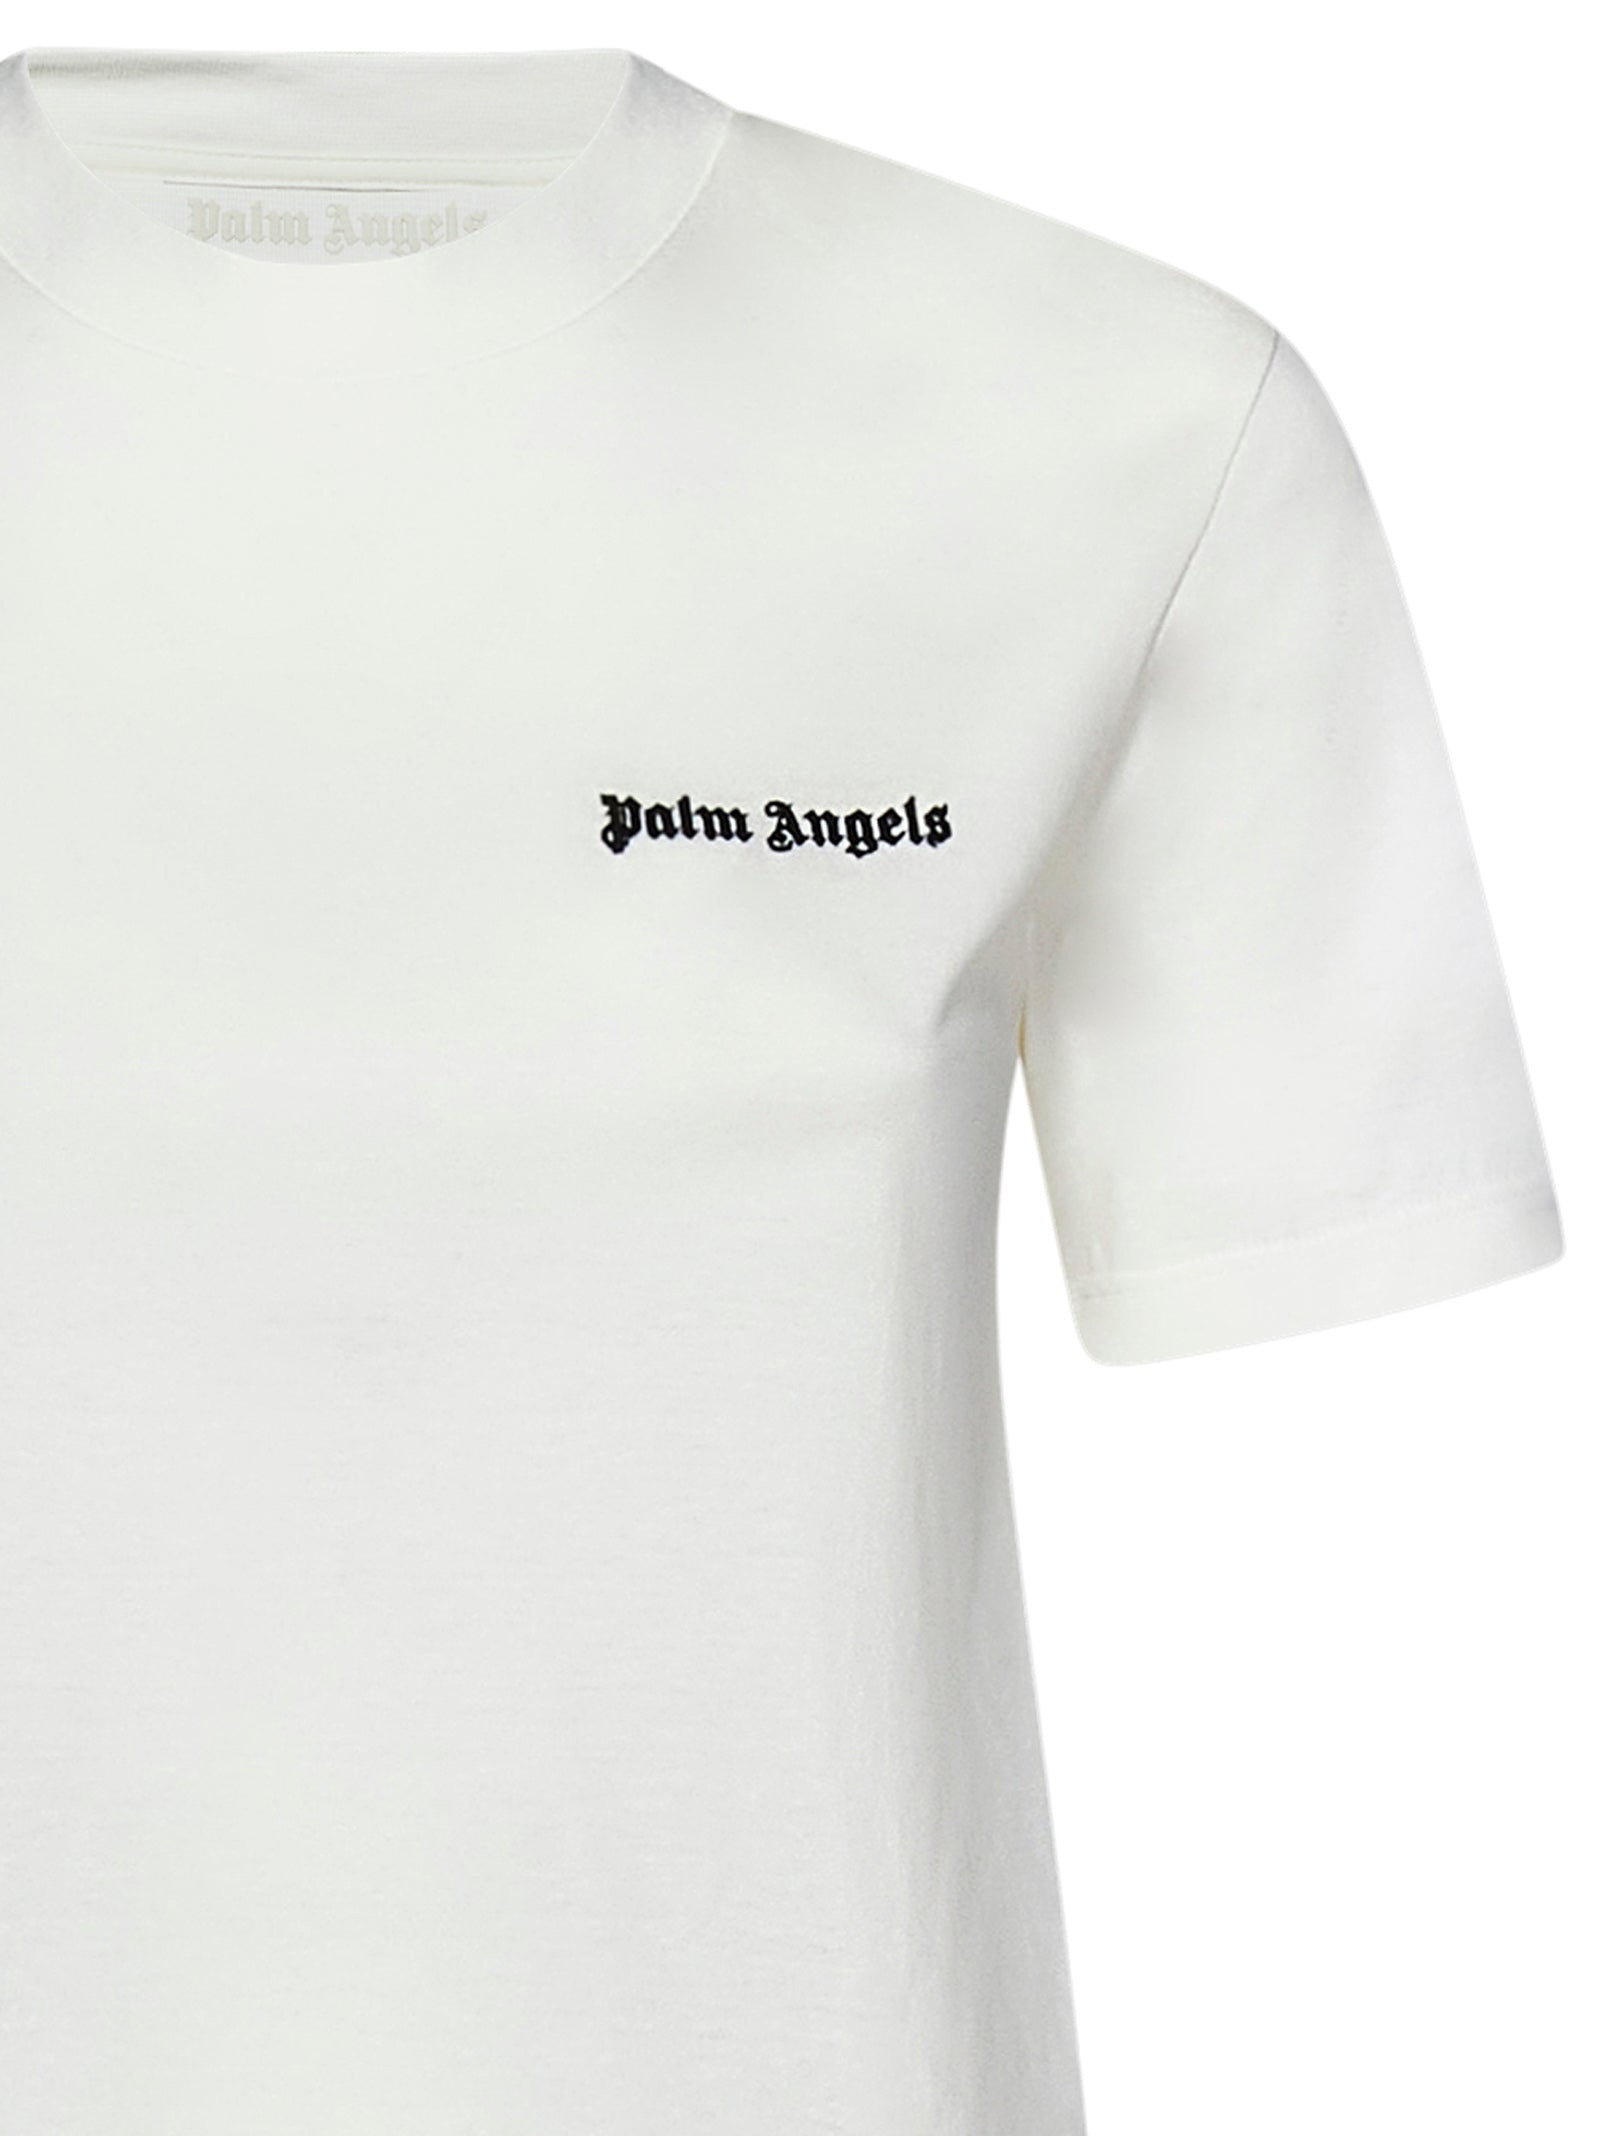 CLASSIC LOGO FITTED PALM ANGELS T-SHIRT - 3